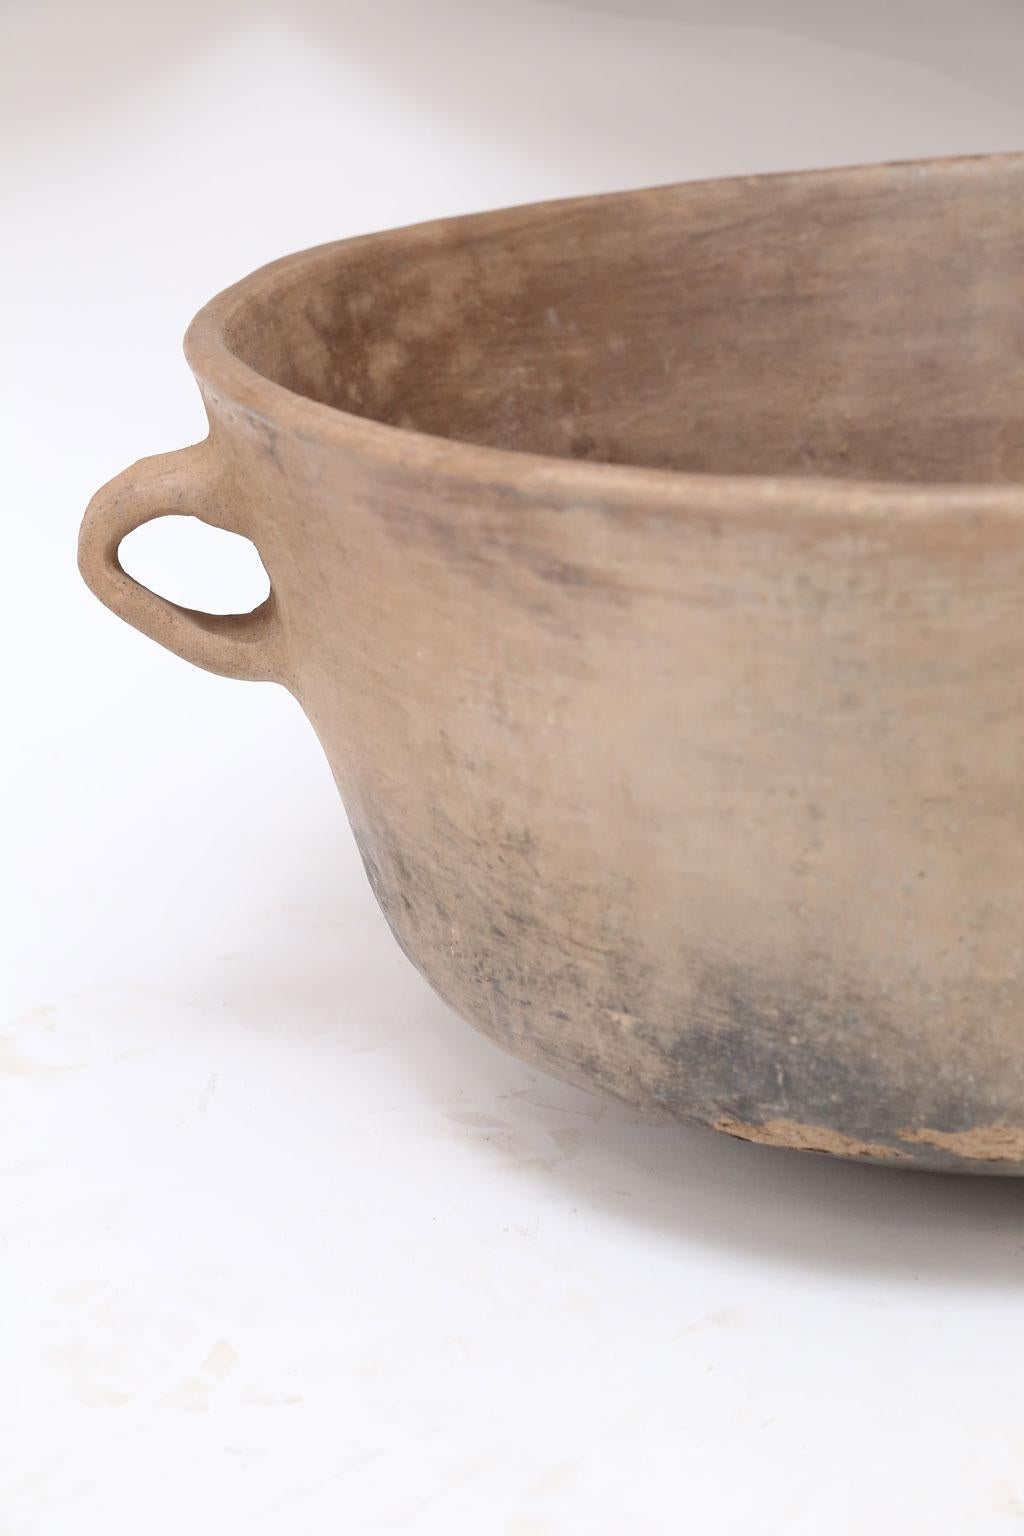 Large Primitive clay cooking bowl from Los Reyes Metzontla, Mexico. This vintage vessel is hand-sculpted, created and used circa 1950 by the indigenous population of the isolated Mexican highlands of Puebla (Zapotitlán). Exhibiting a nice rich